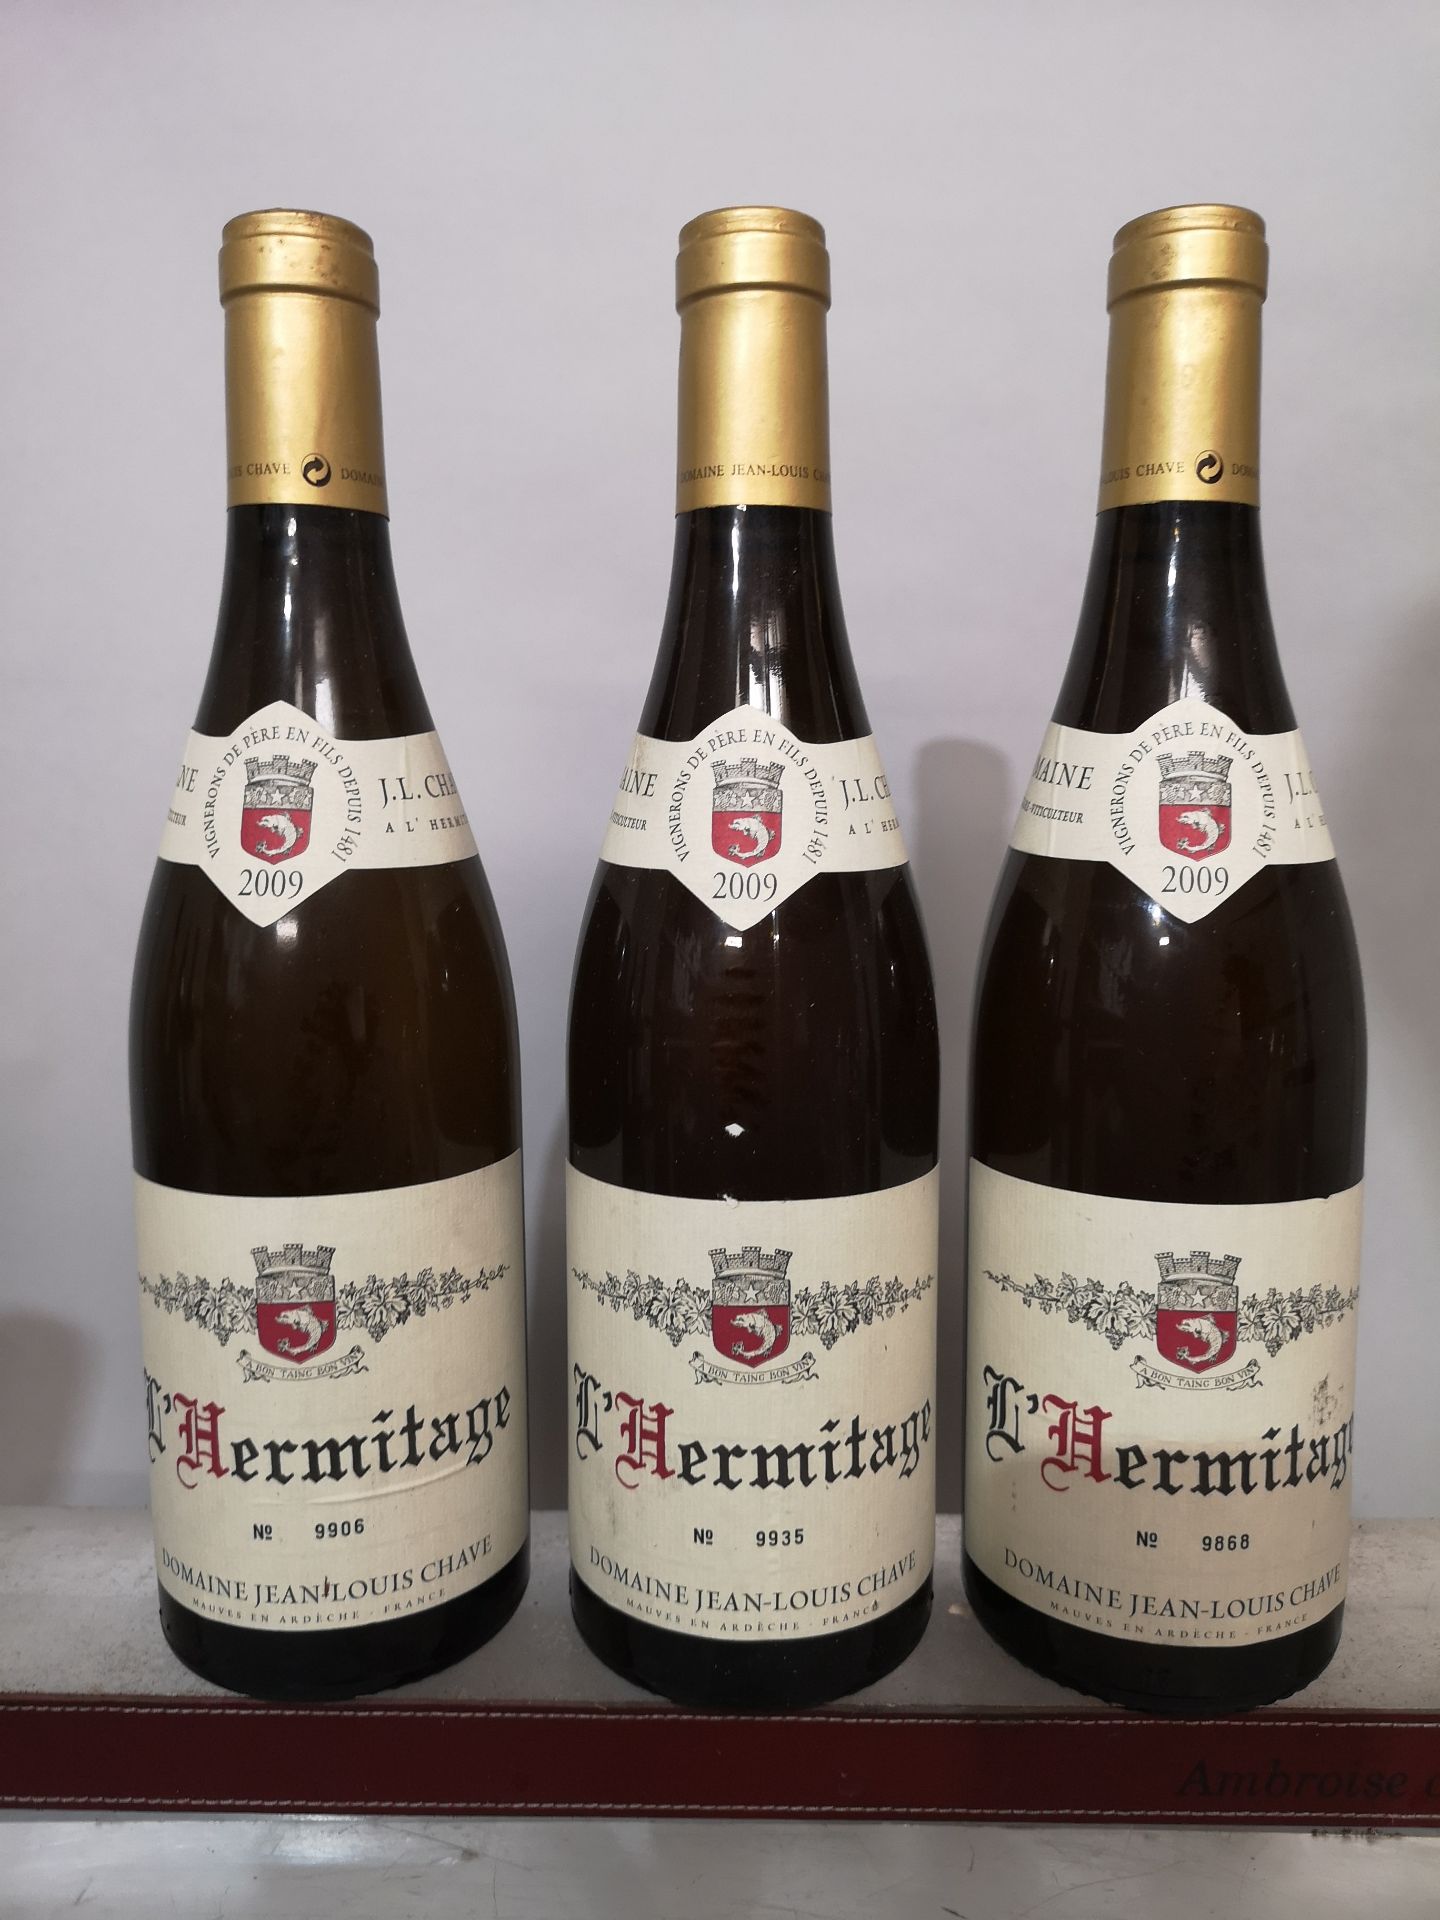 3 bottles HERMITAGE White - Jean-Louis Chave 2009.